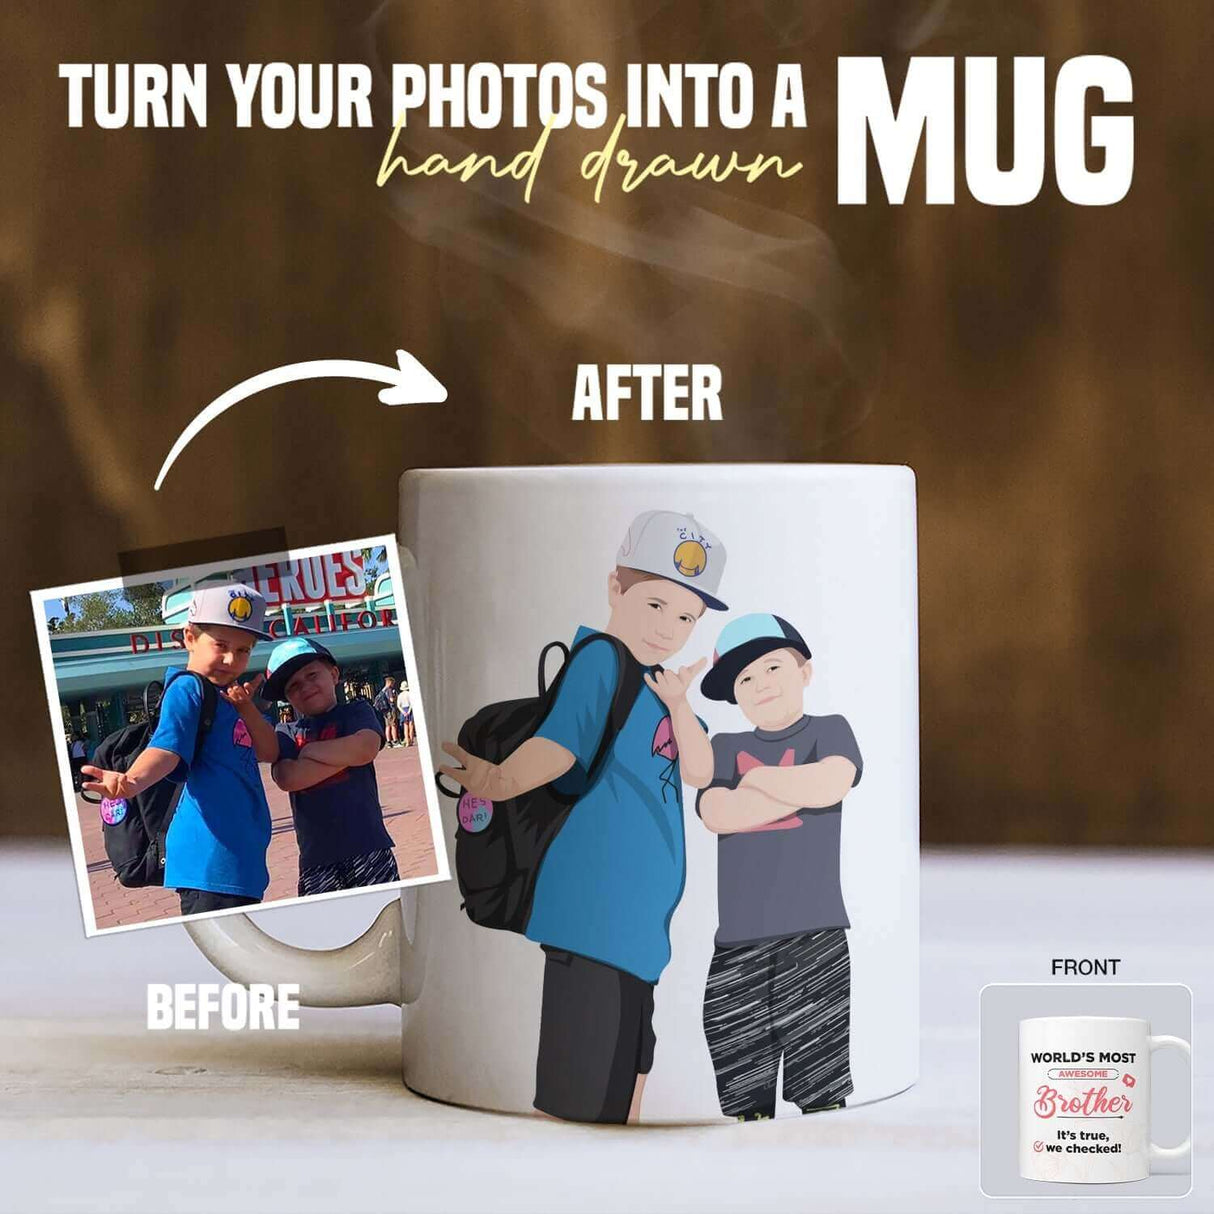 Personalized Worlds Most Awesome Brother Mug